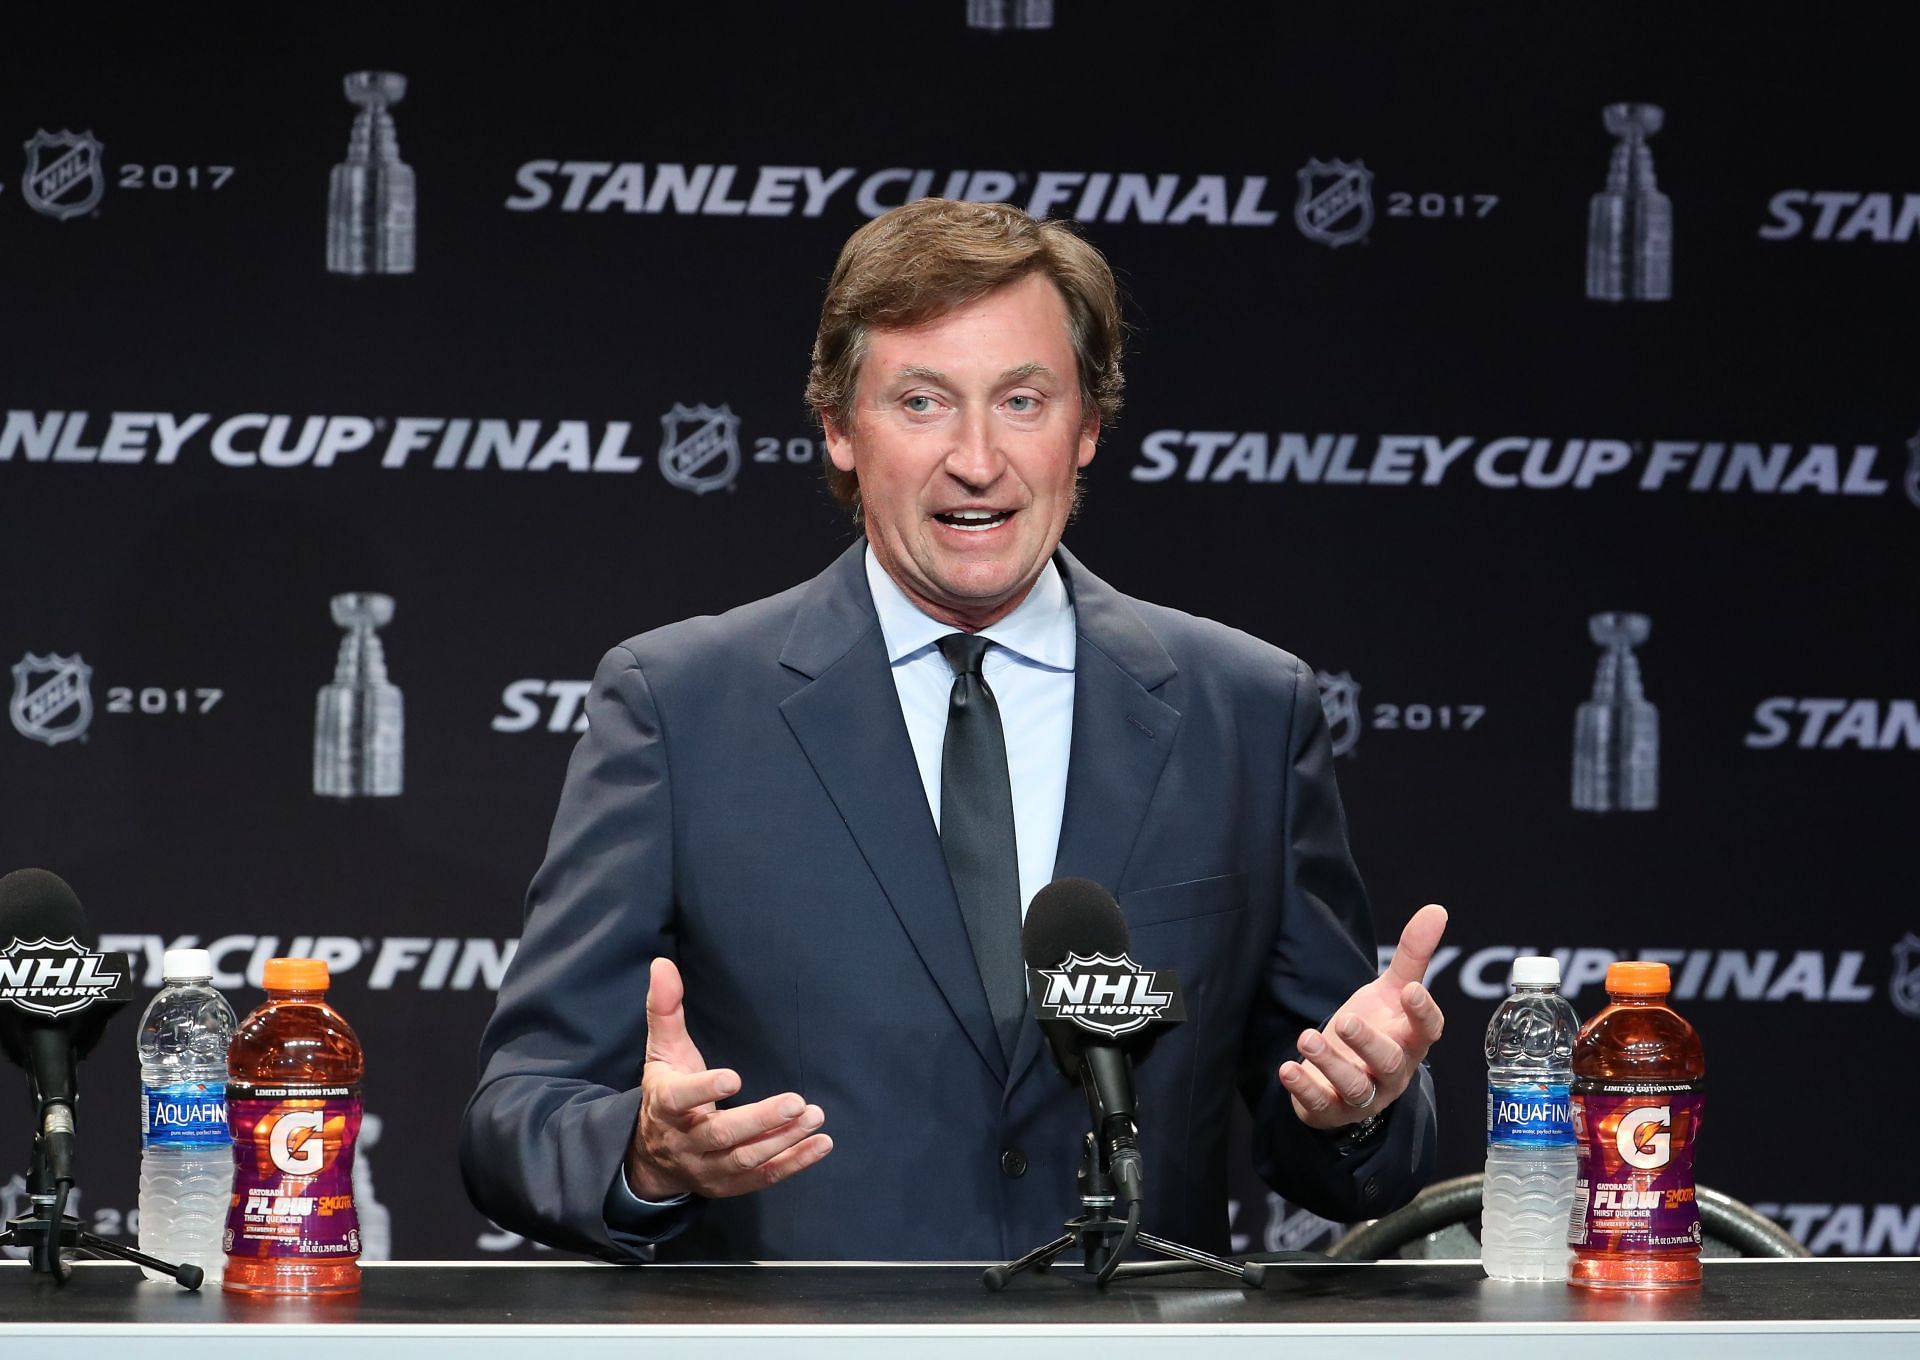 Wayne Gretzky critical about the current state of hockey. - HockeyFeed